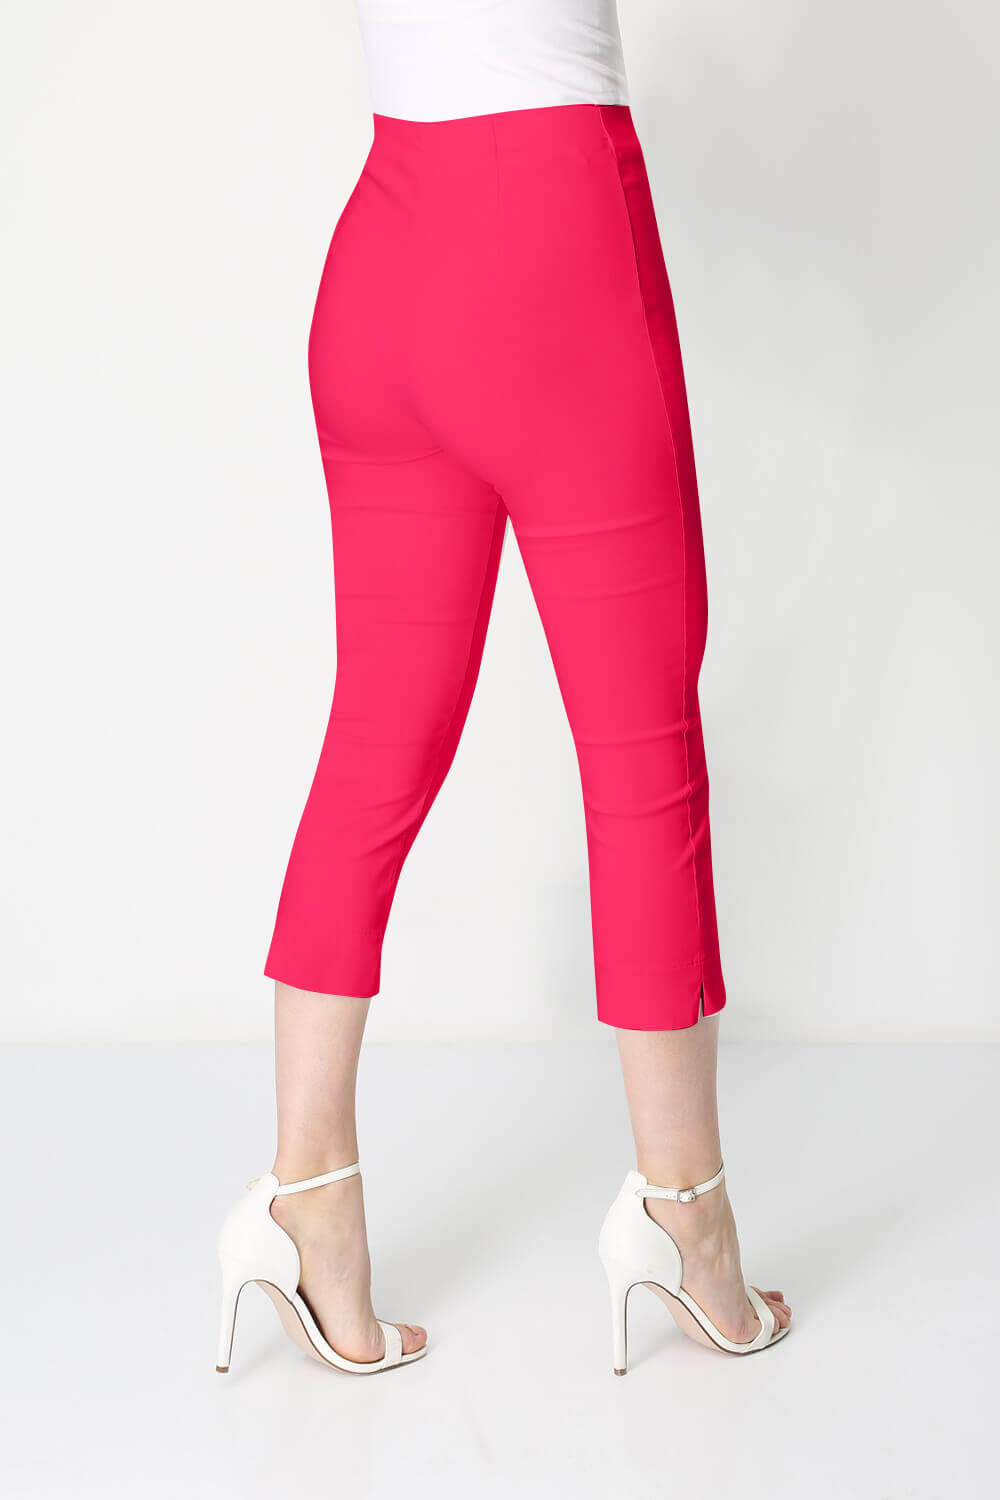 Fuschia Pink Cropped Stretch Trouser, Image 2 of 7